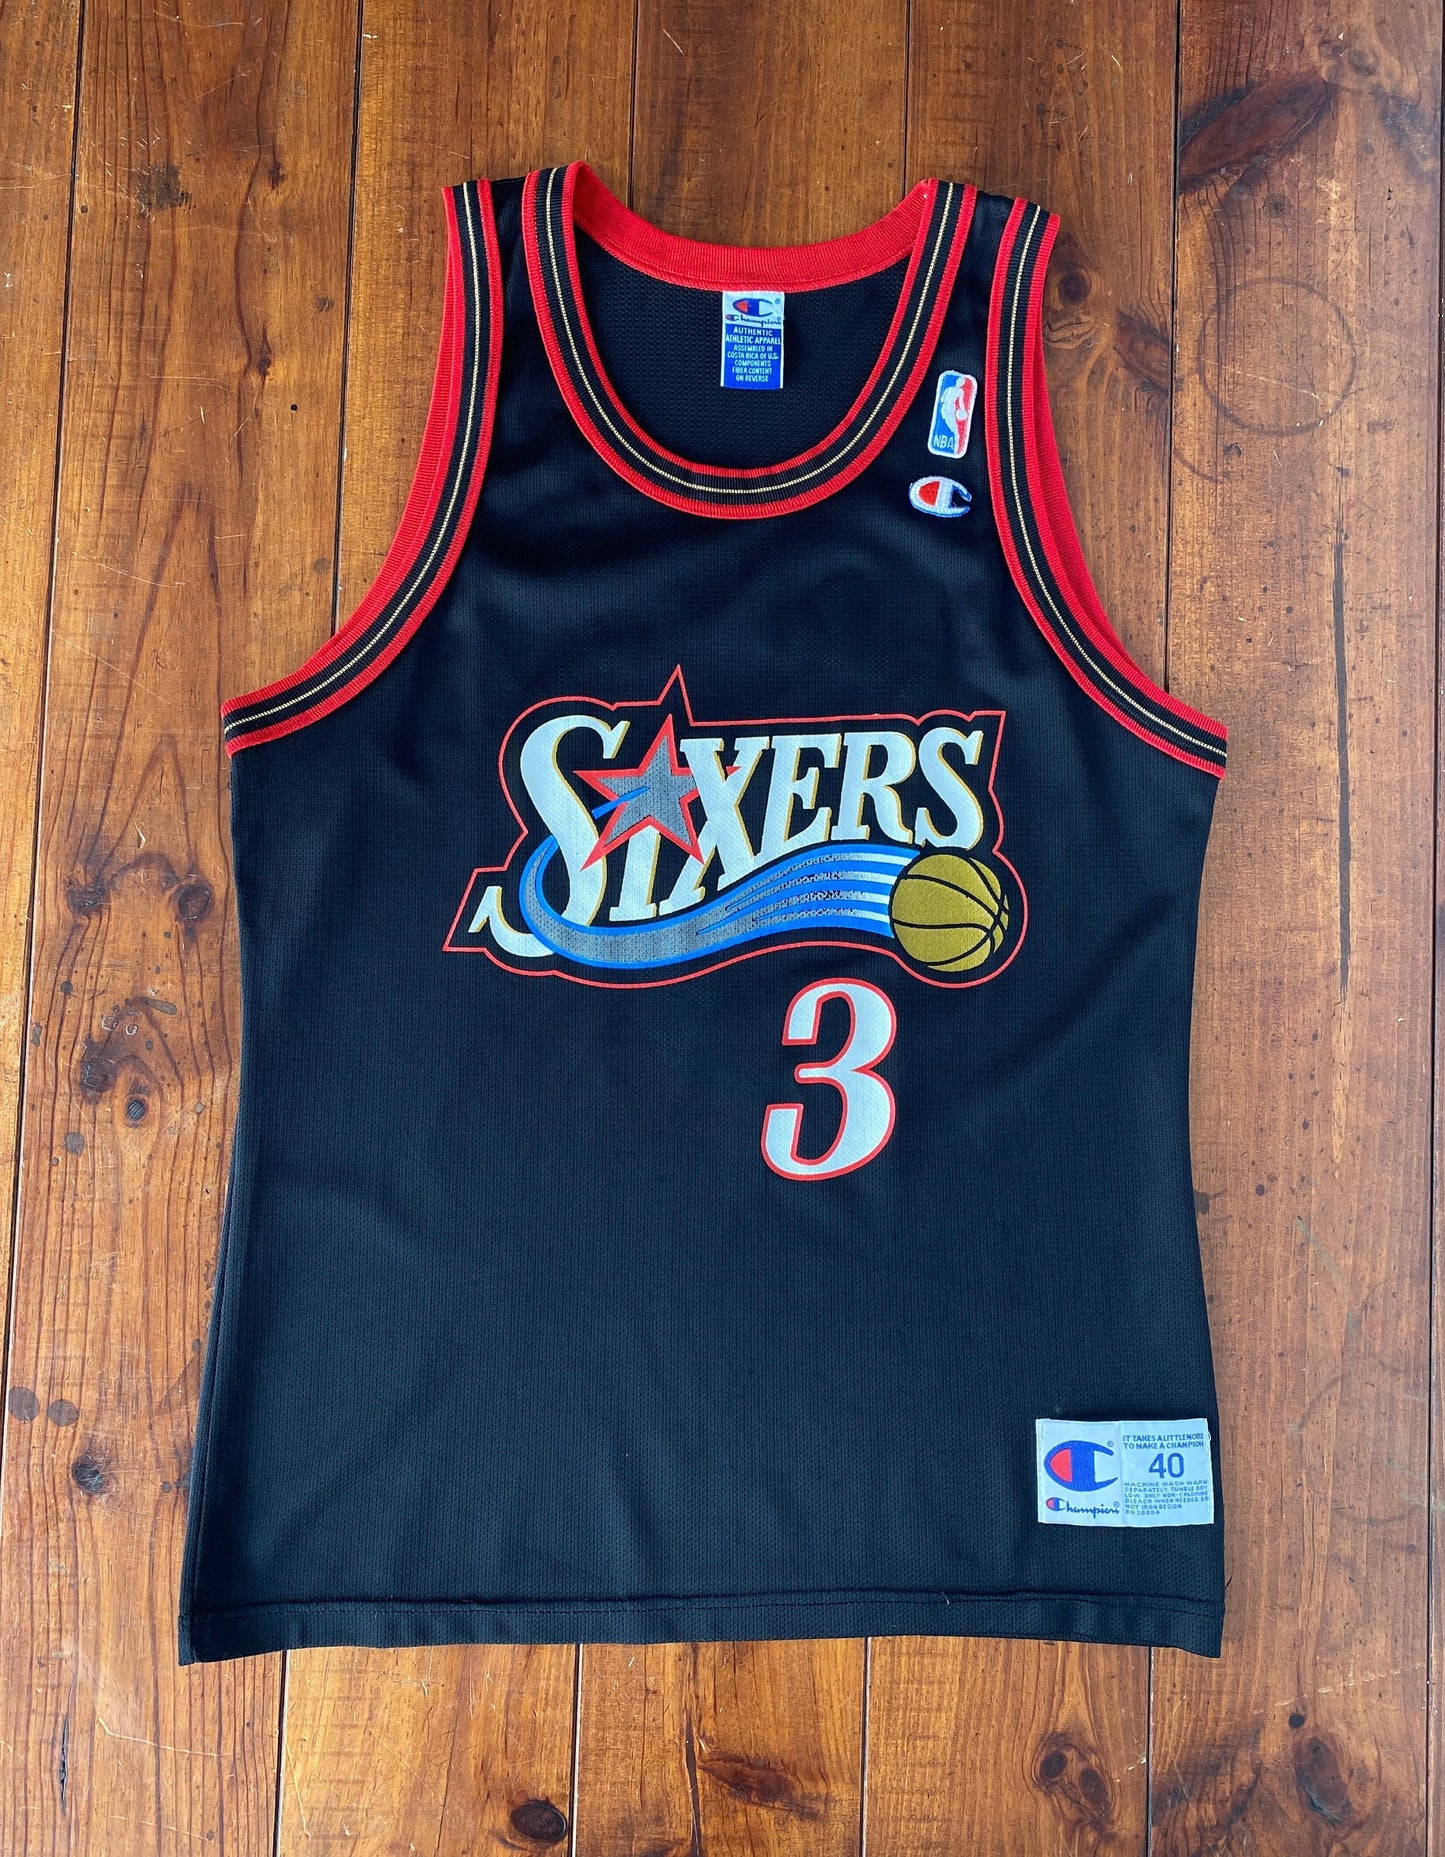 Vintage Sixers NBA Jersey Iverson number 3